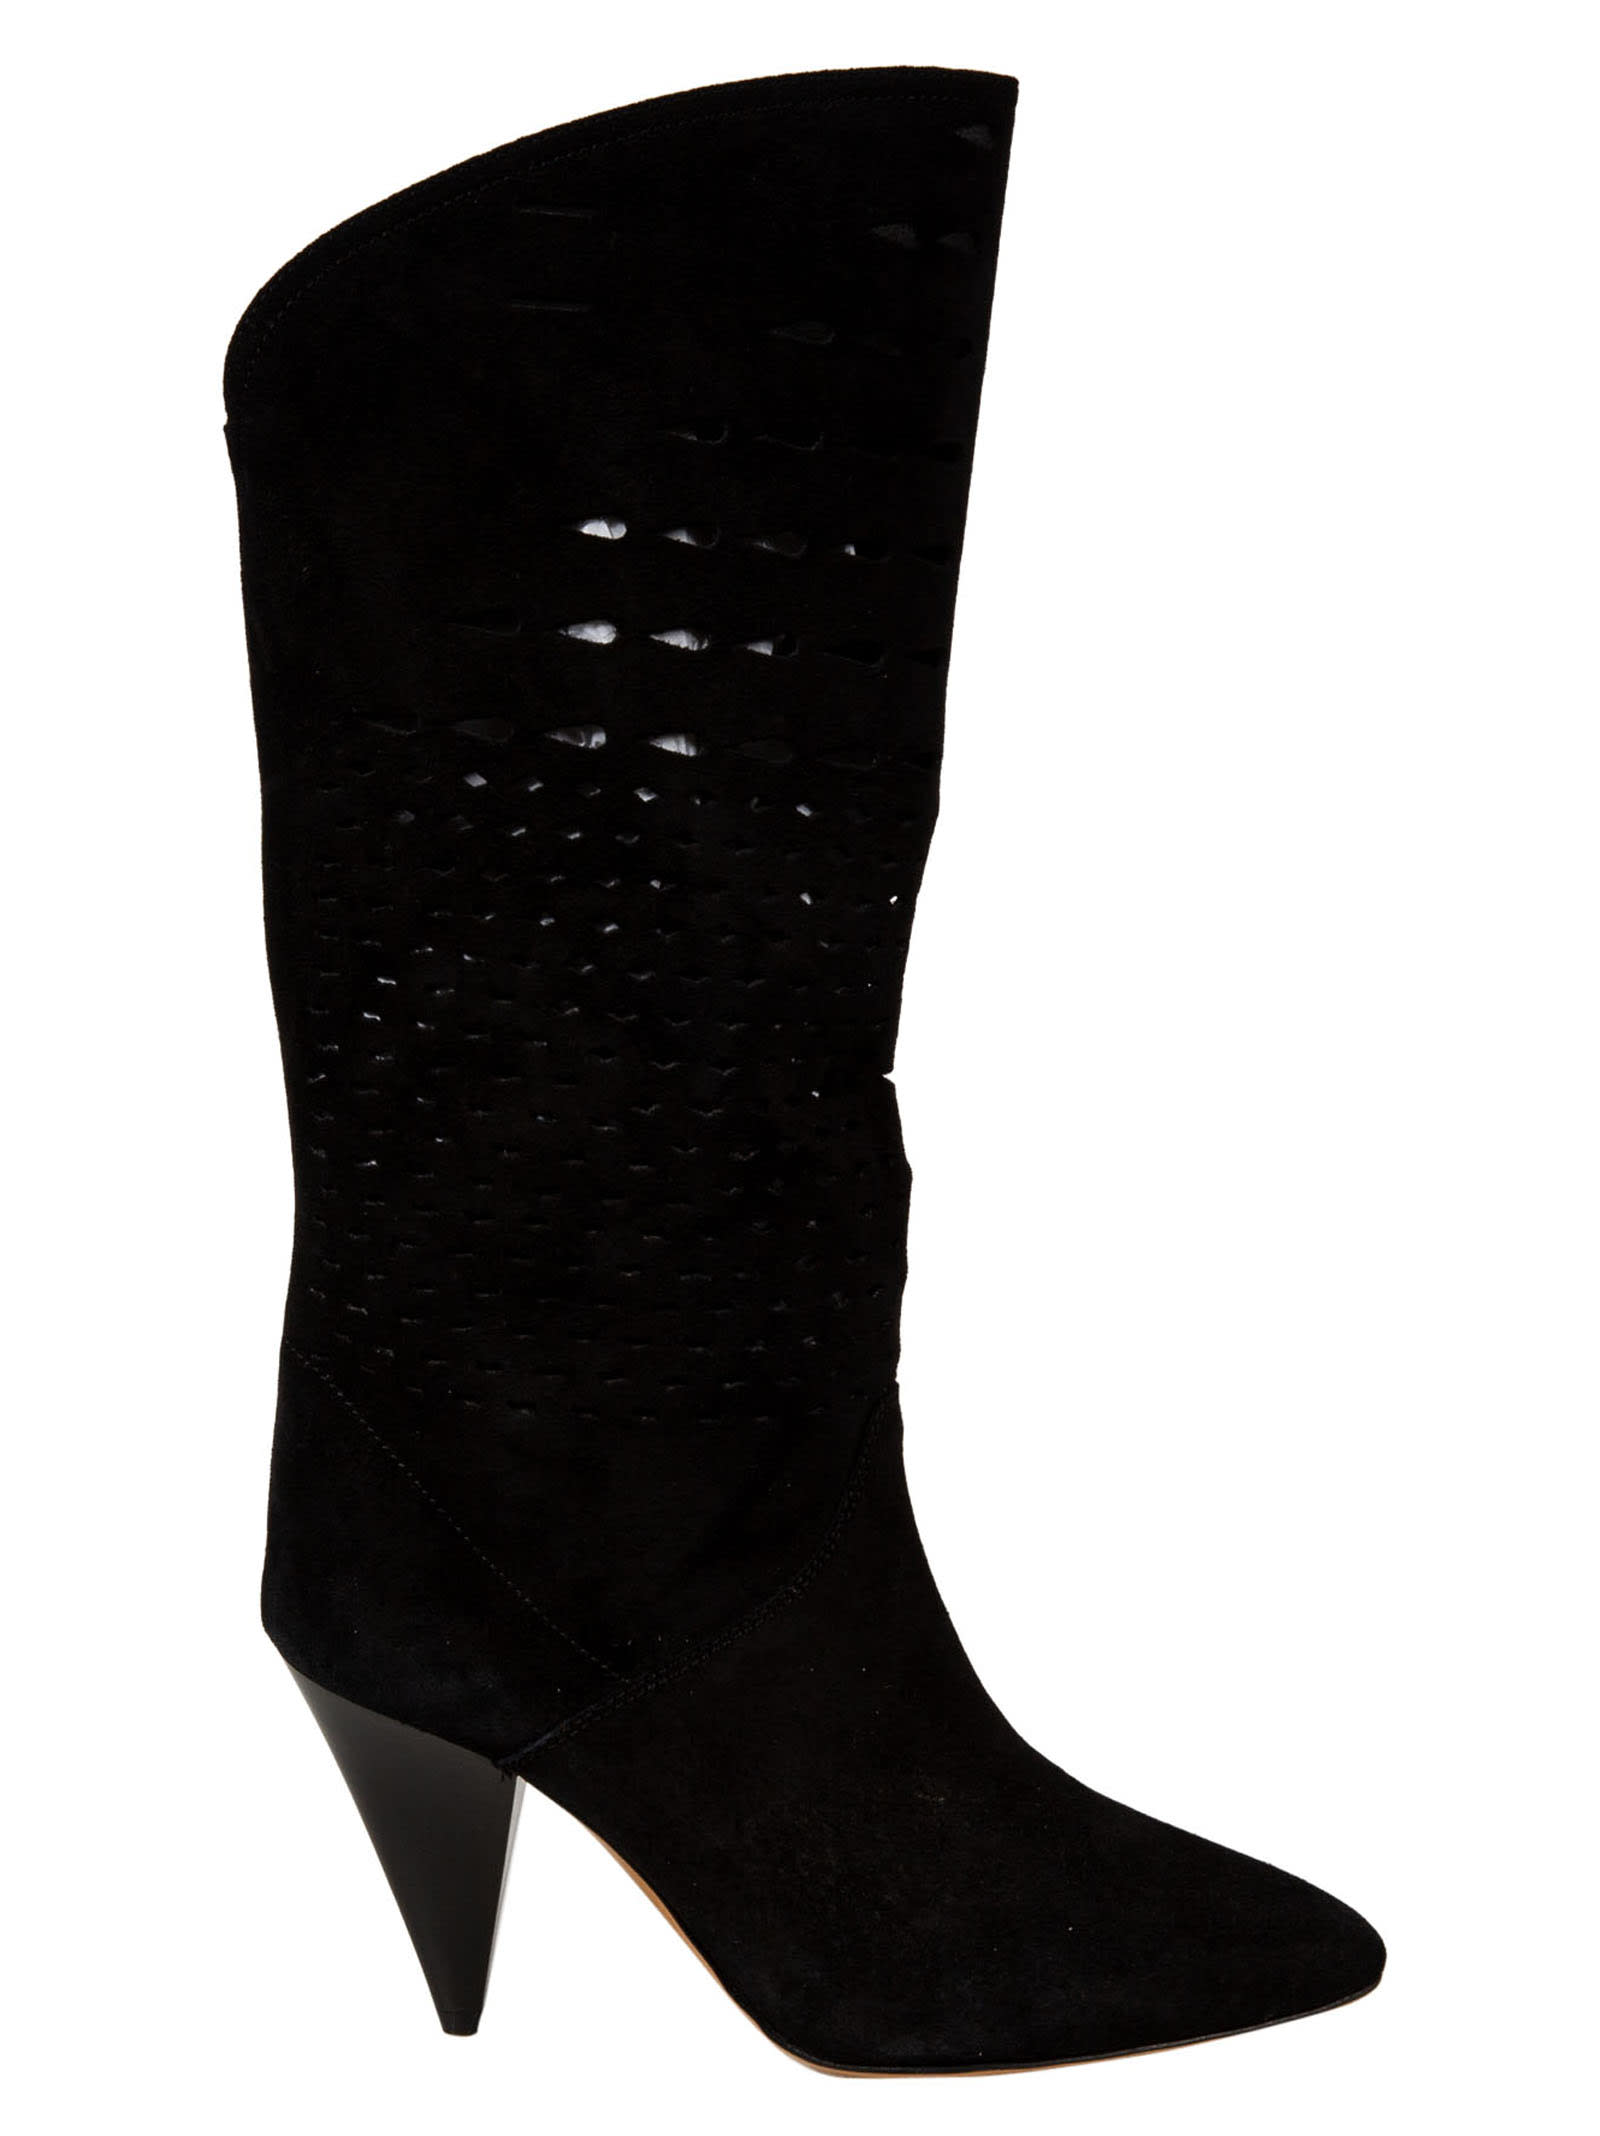 Buy Isabel Marant Lurrey Perforated Boots online, shop Isabel Marant shoes with free shipping